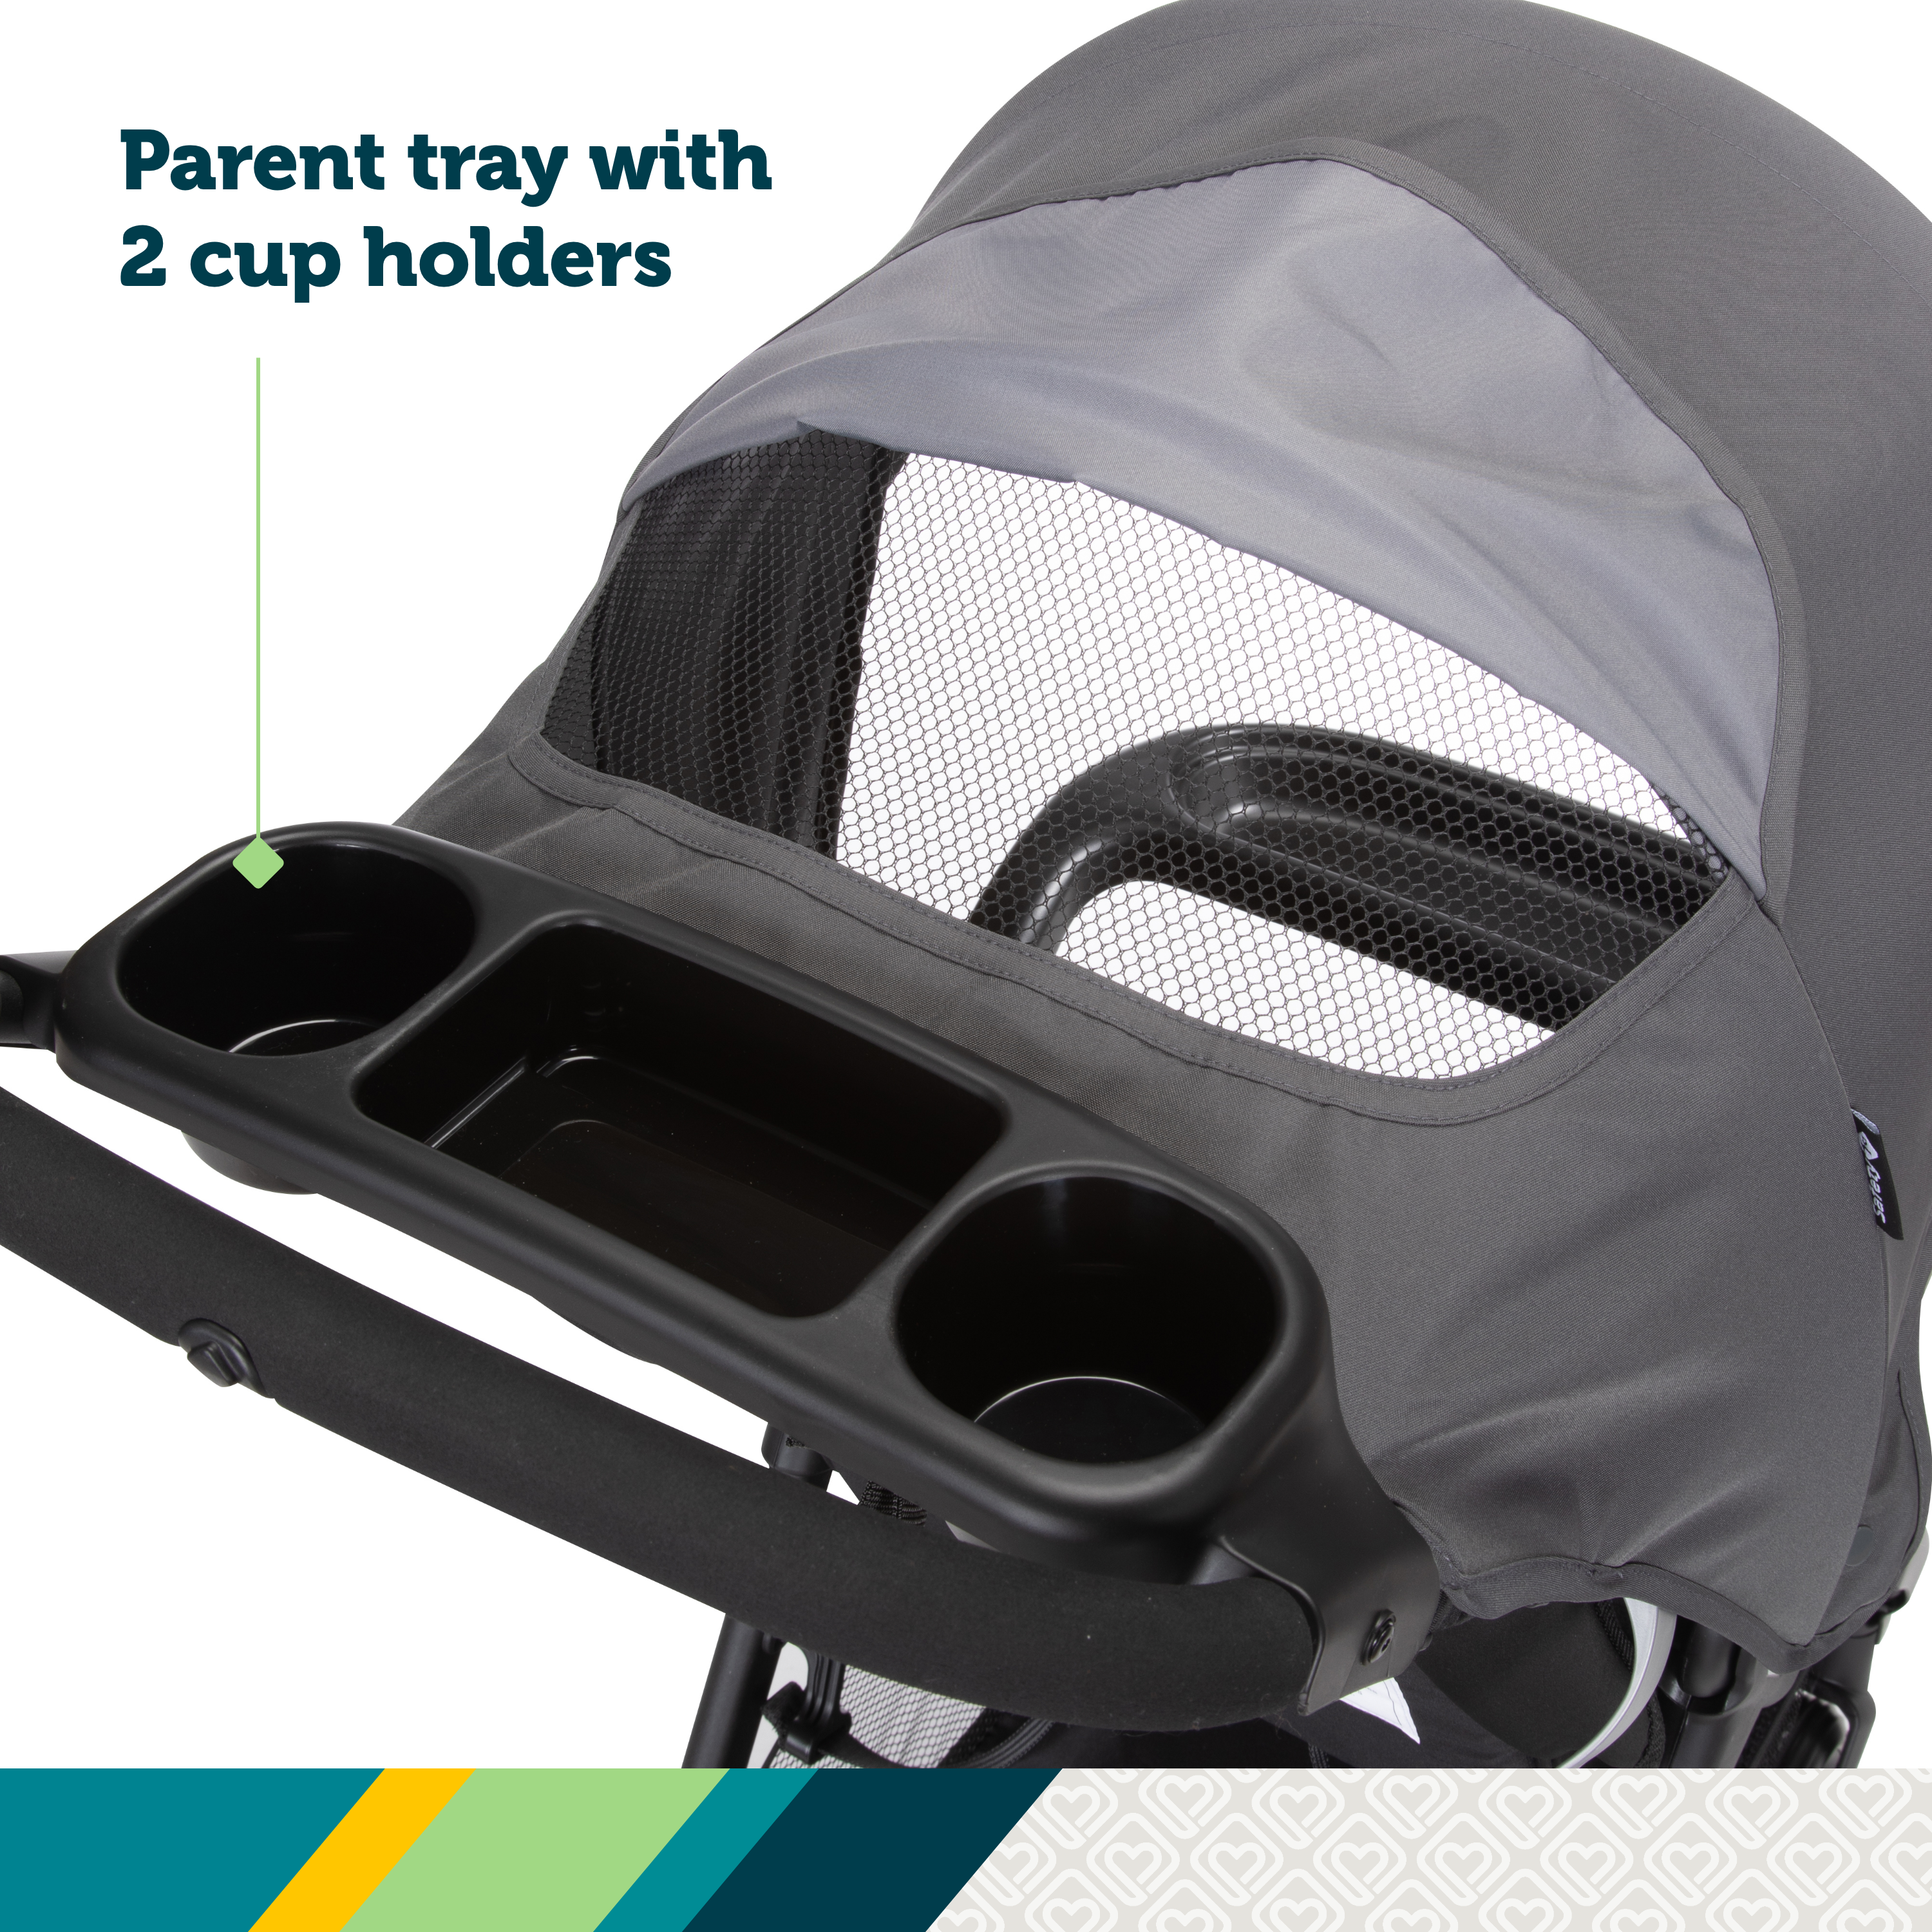 Smooth Ride Travel System - parent tray with 2 cup holders